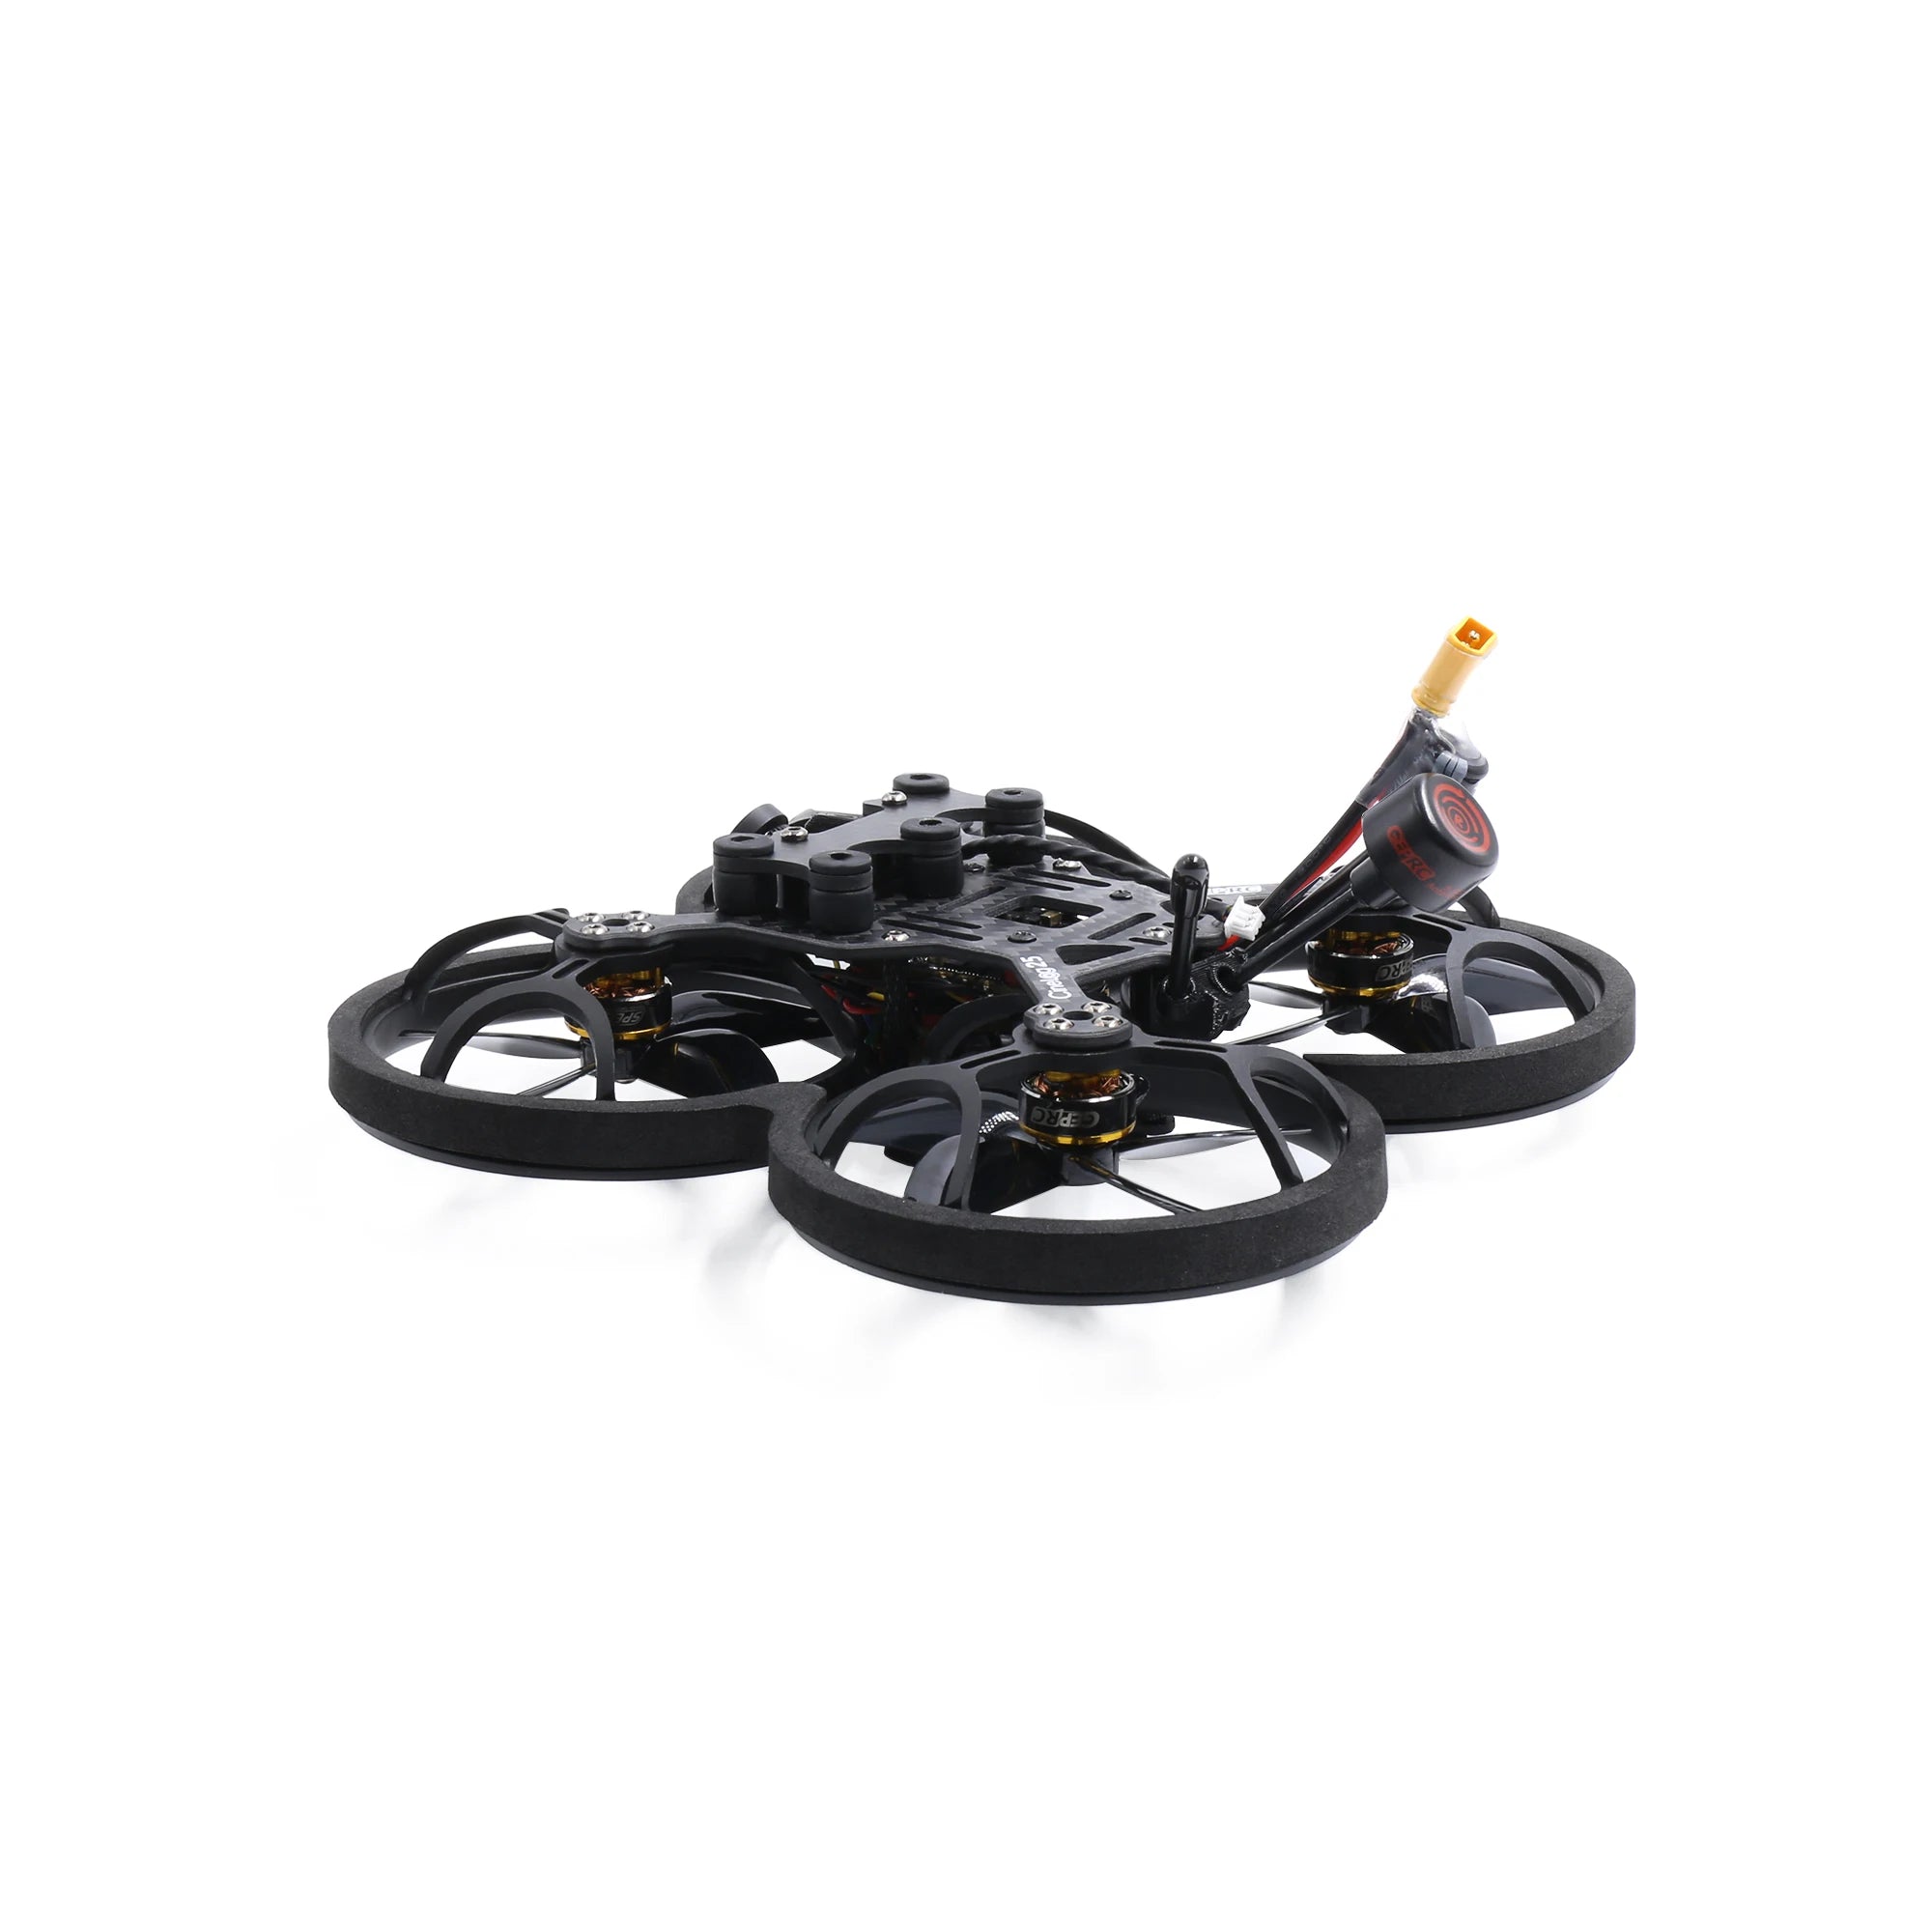 GEPRC CineLog25 Analog CineWhoop Drone, redesigned the shock absorption structure of the camera mount and GoPro Lite .